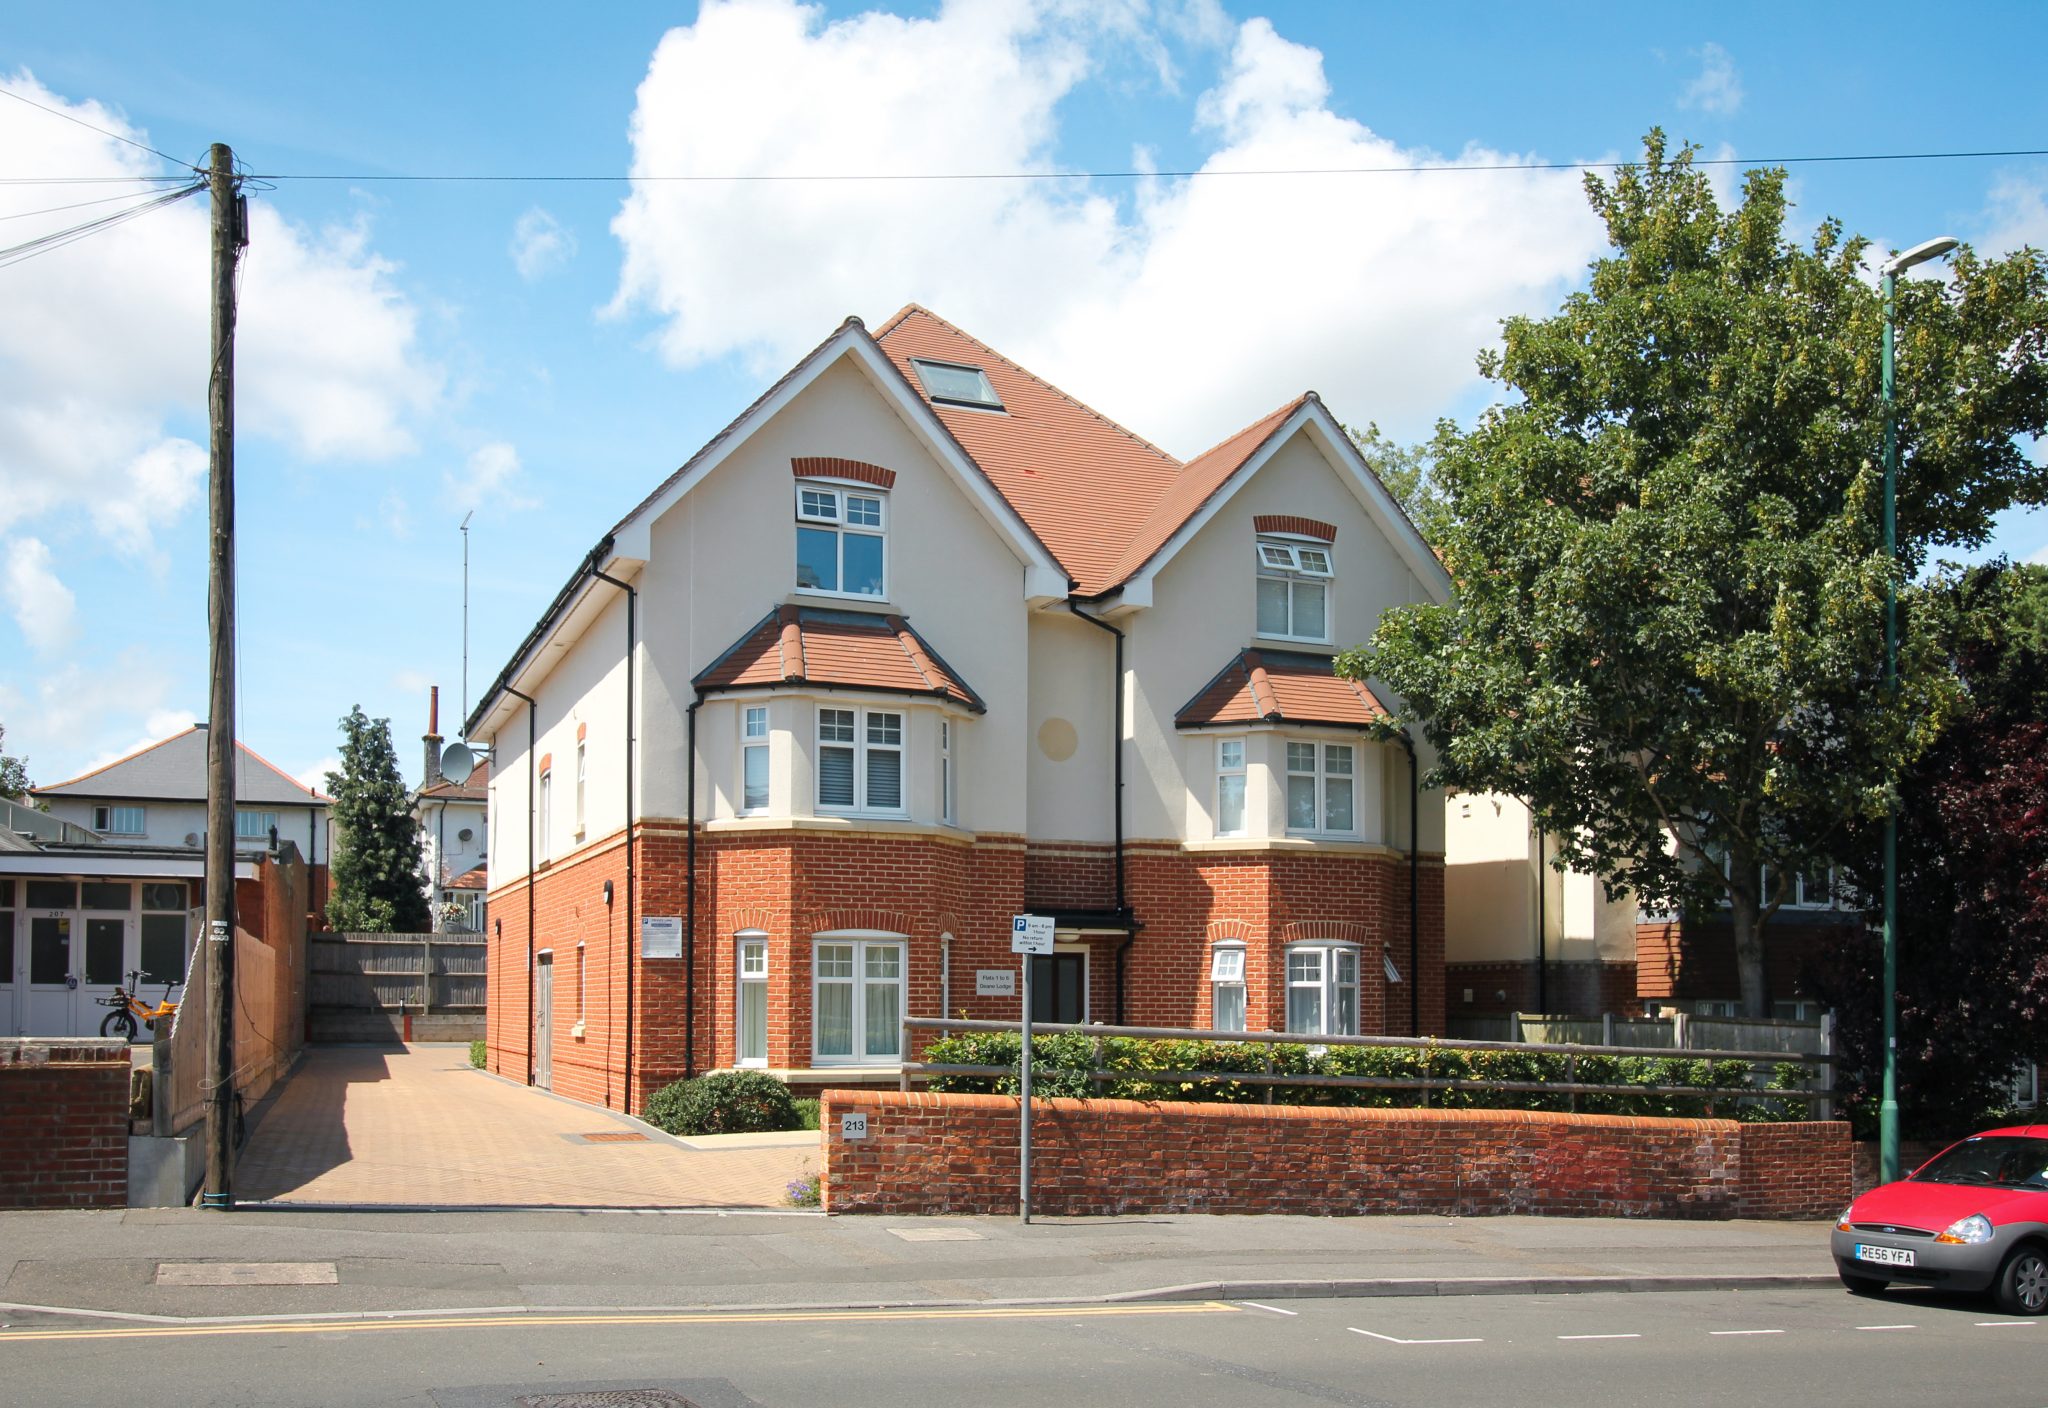 brand new flats for sale in Charminster Bournemouth Dorset